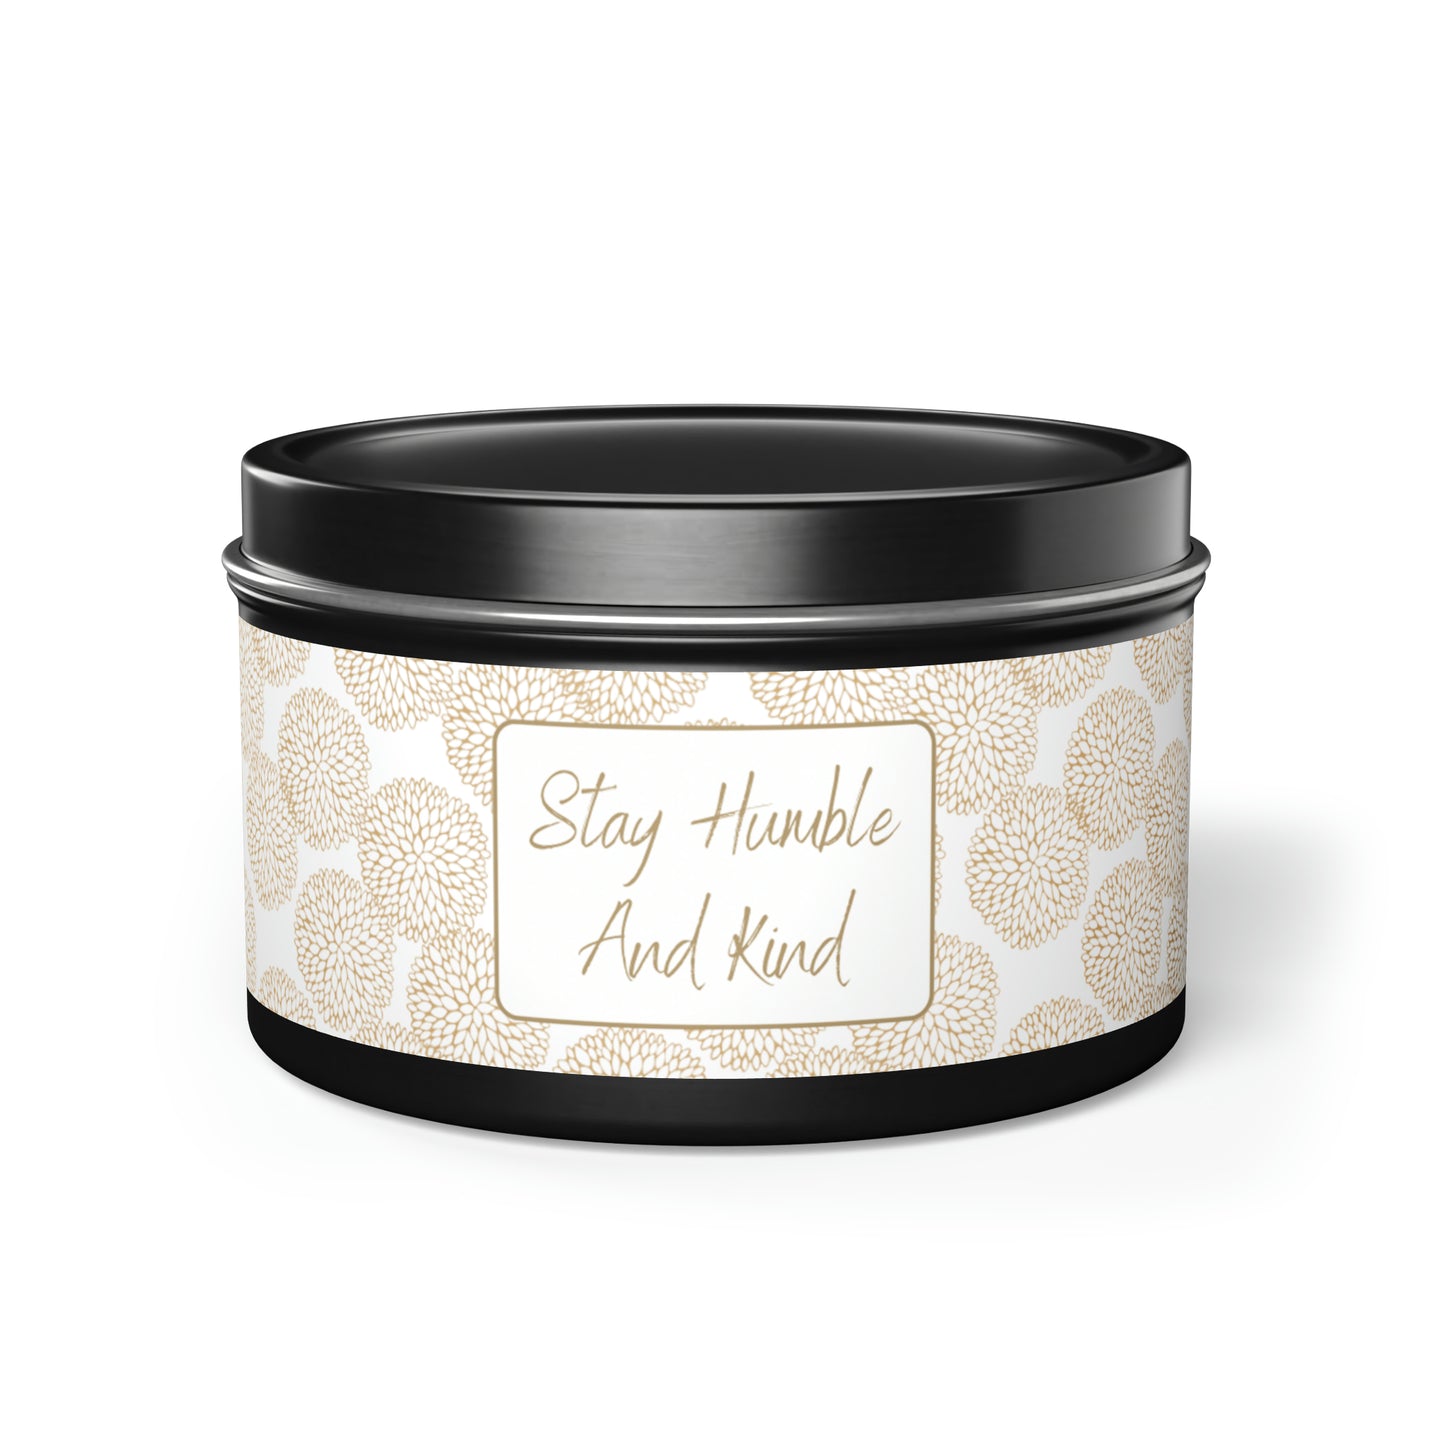 Stay Humble and Kind Tin Candles